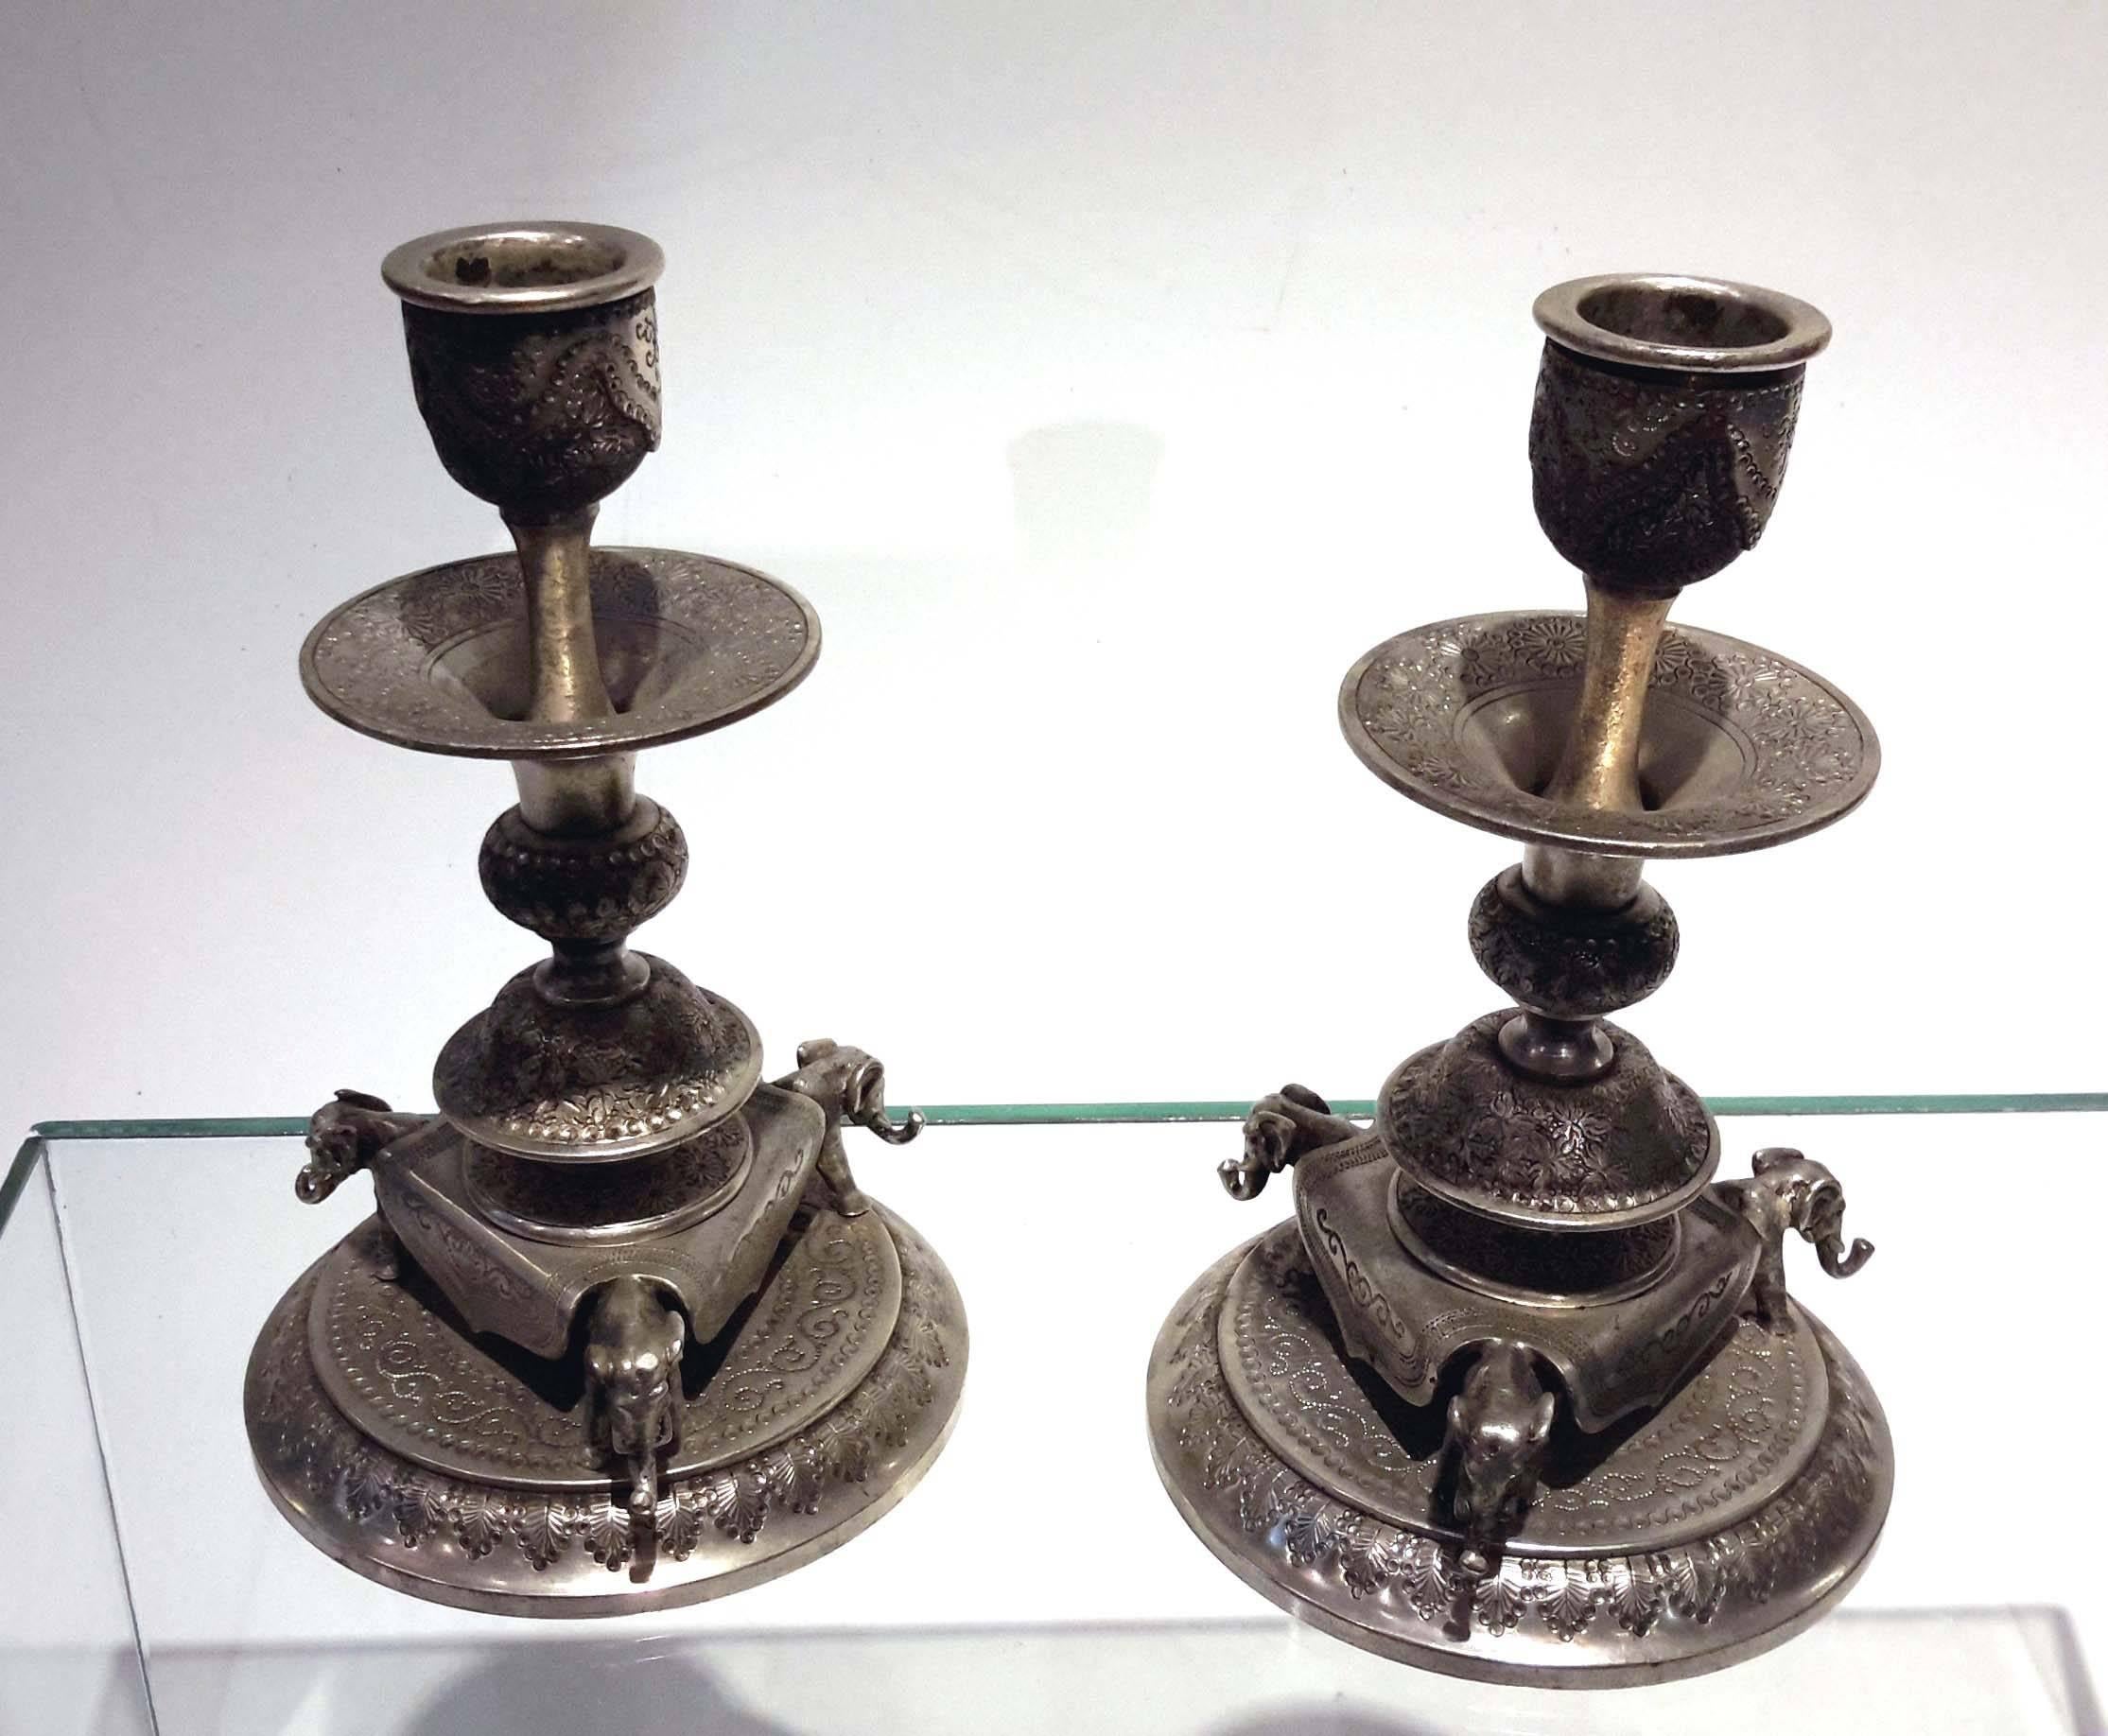 Aesthetic Movement Rare 19th Century Austrian Silvered Bronze Inkwell and Candlestick Set